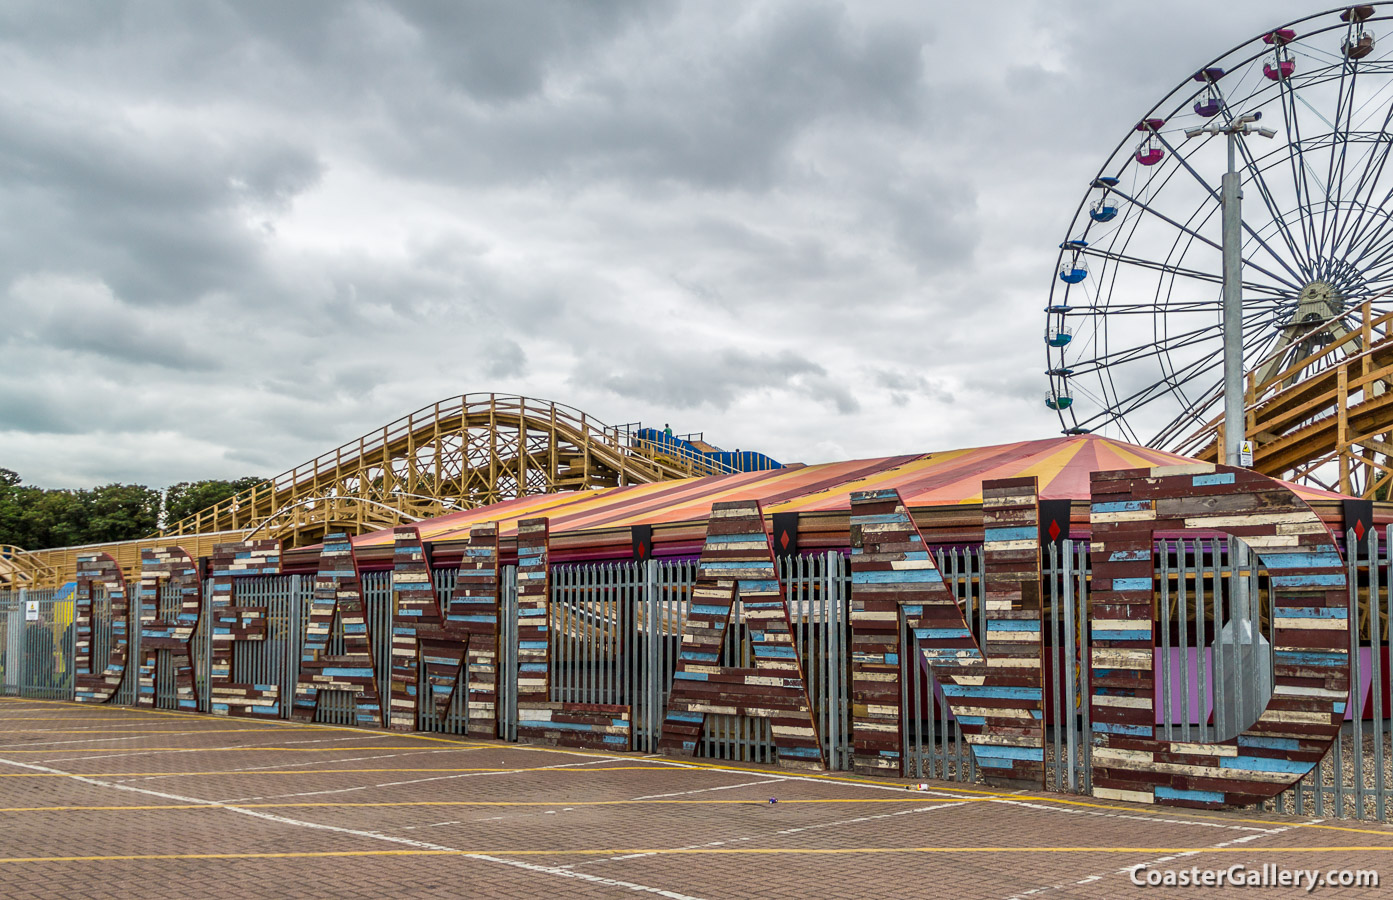 Parallel lift hills on the Scenic Railway roller coaster at Dreamland in Margate, England, United Kindgom